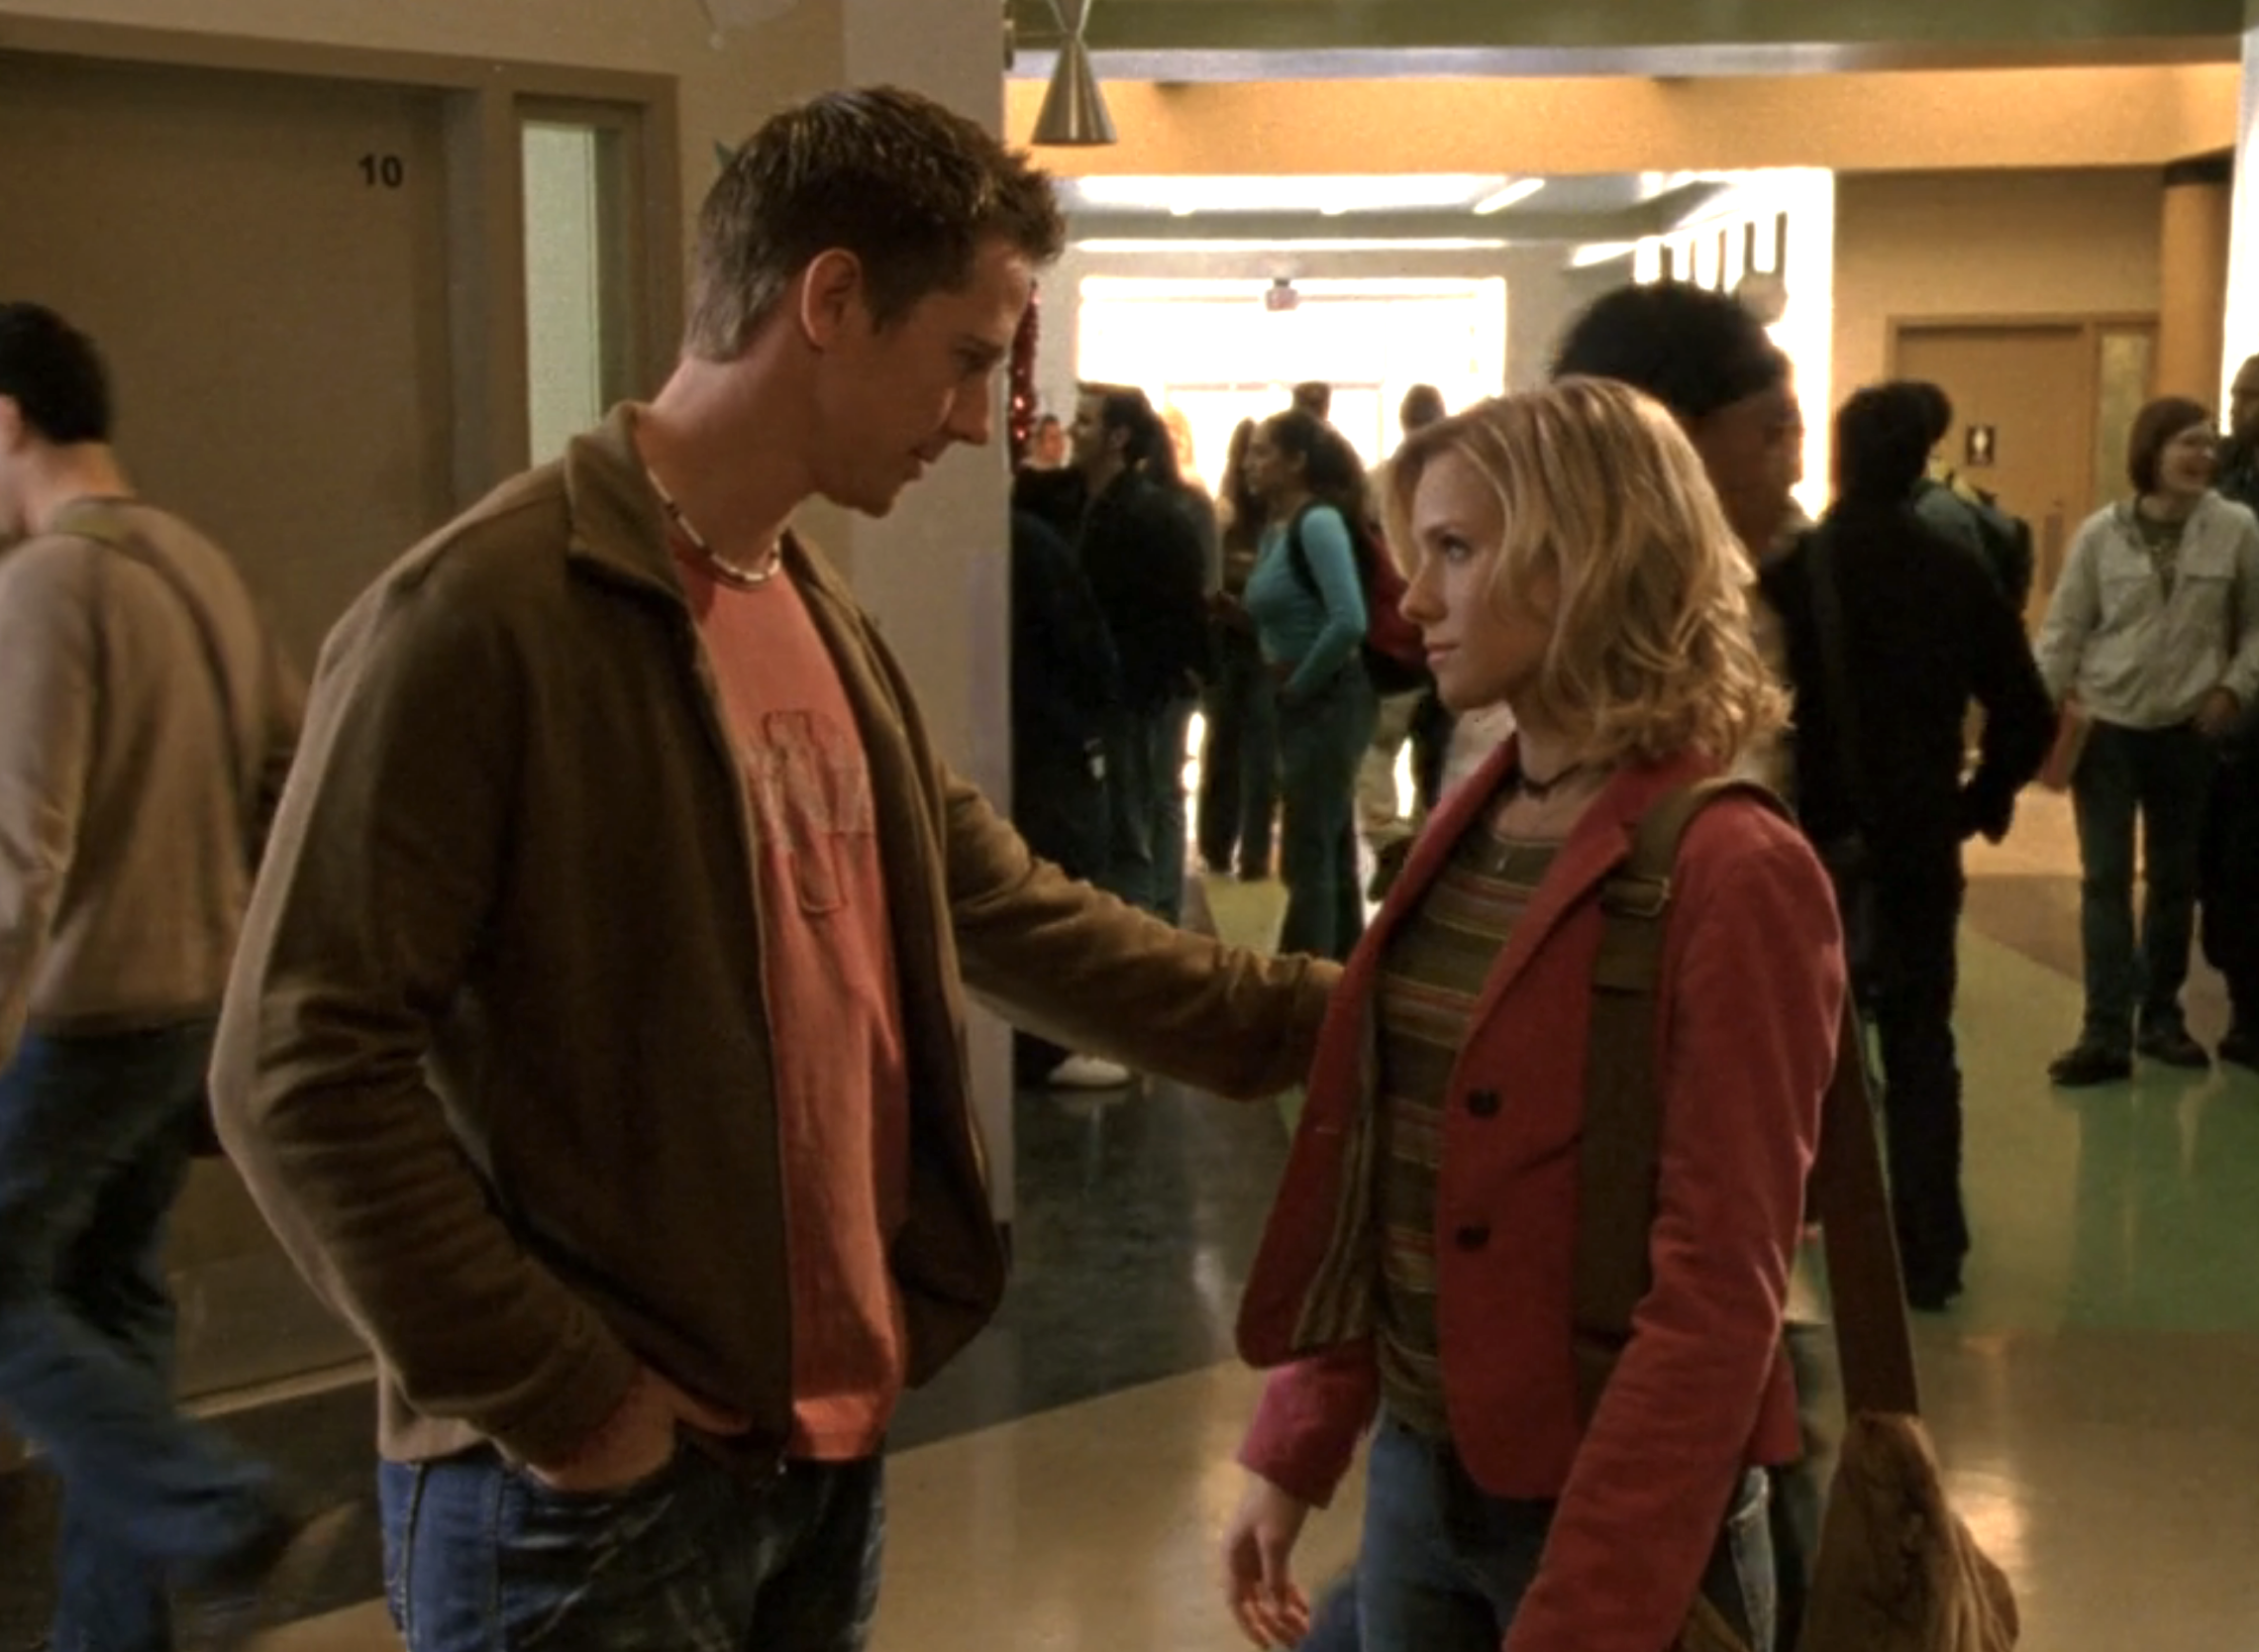 Screenshot from Veronica Mars S1E15. Logan and Veronica are standing in the hallway of Neptune High. Logan has his hand on Veronica's arm and they are making eye contact.